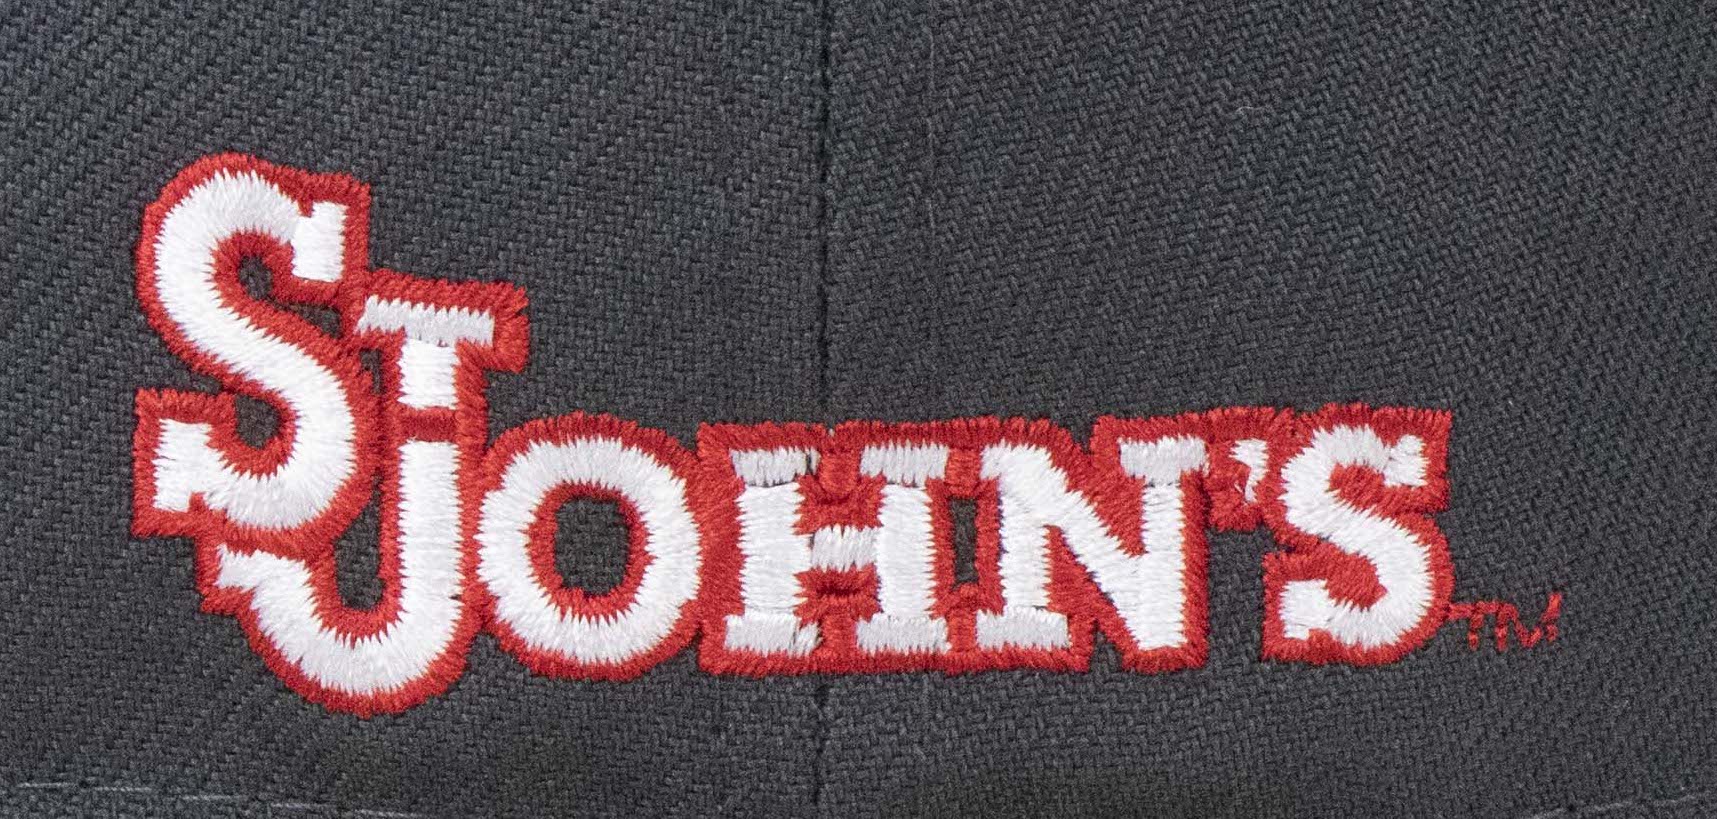 ST. JOHNS REDSTORMS (GREY)NEW ERA 59FIFTY FITTED